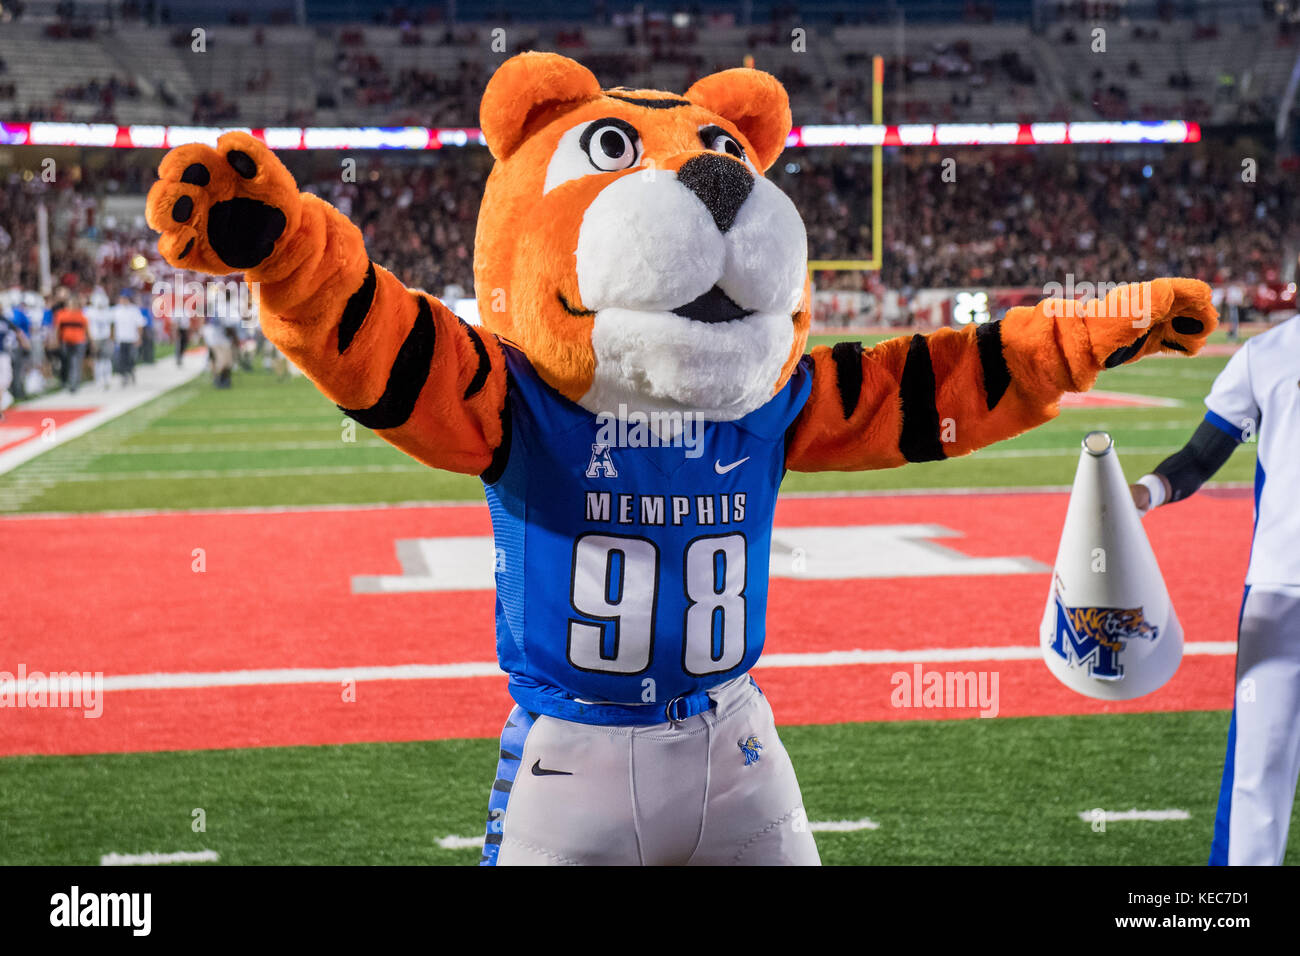 Houston, TX, USA. 19th Oct, 2017. Memphis Tigers mascot Pouncer performs  prior to an NCAA football game between the Memphis Tigers and the  University of Houston Cougars at TDECU Stadium in Houston